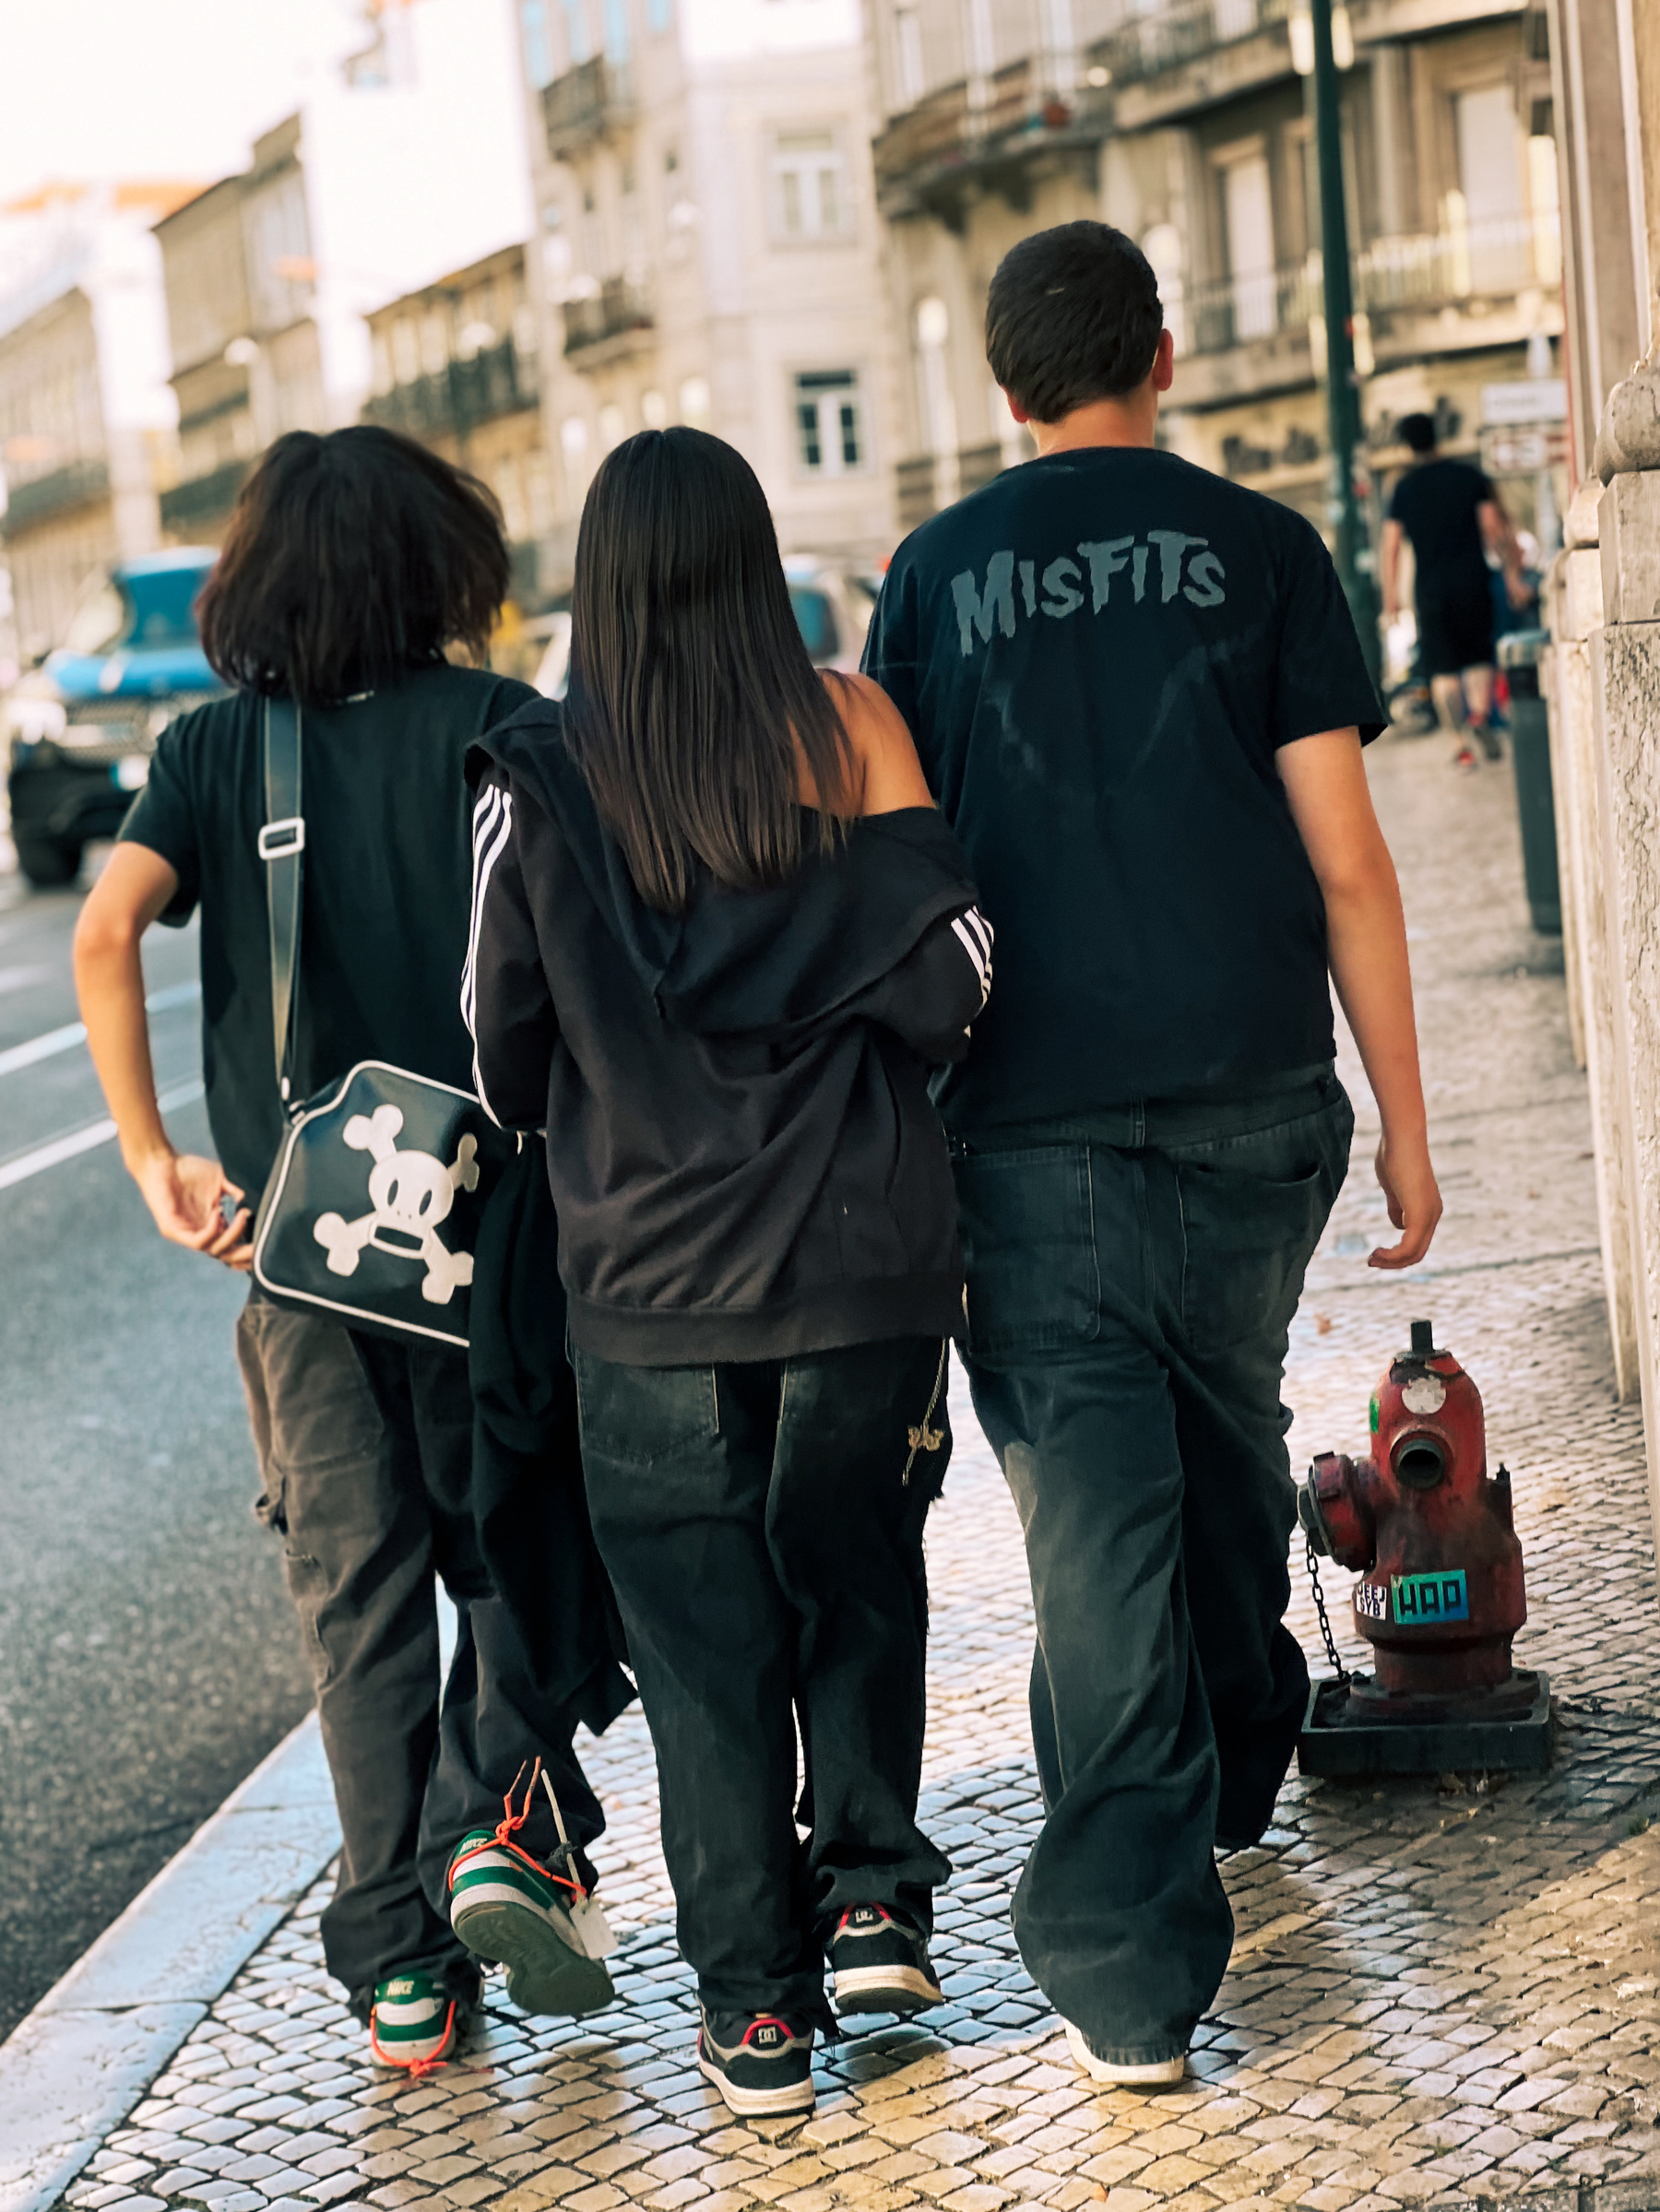 Three goth enthusiasts walk away from us. This-shirt says Misfits. 